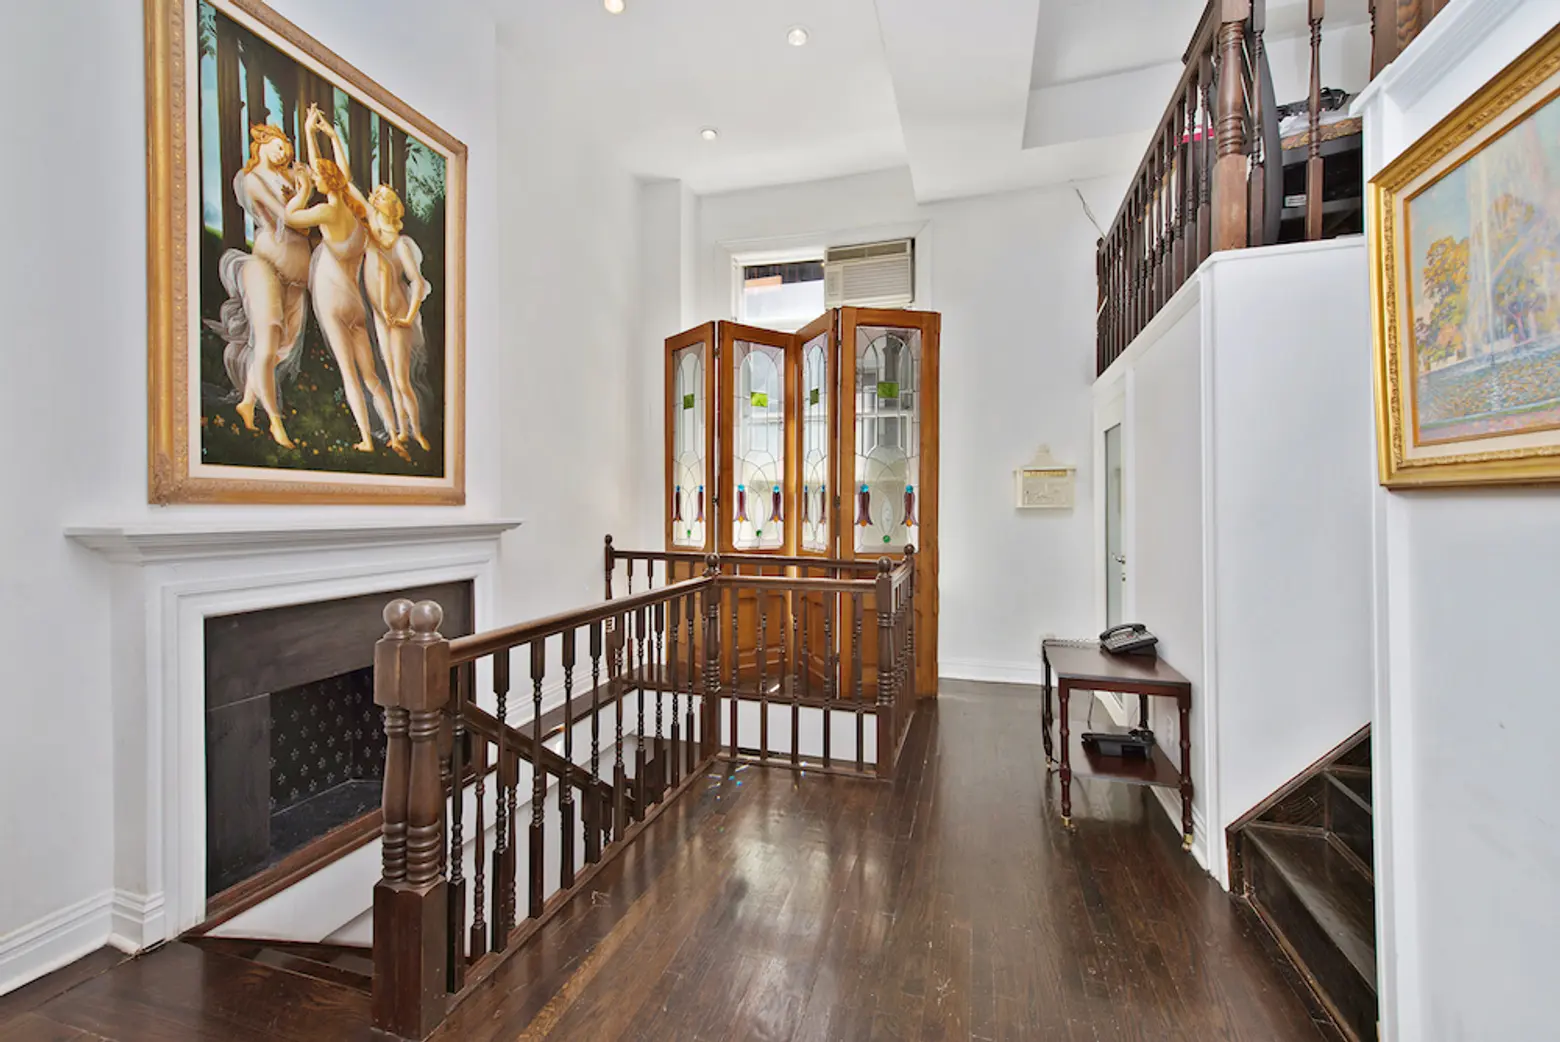 Lenox Hill Townhouse Near Andy Warhol’s Last Residence Asks $14.5M